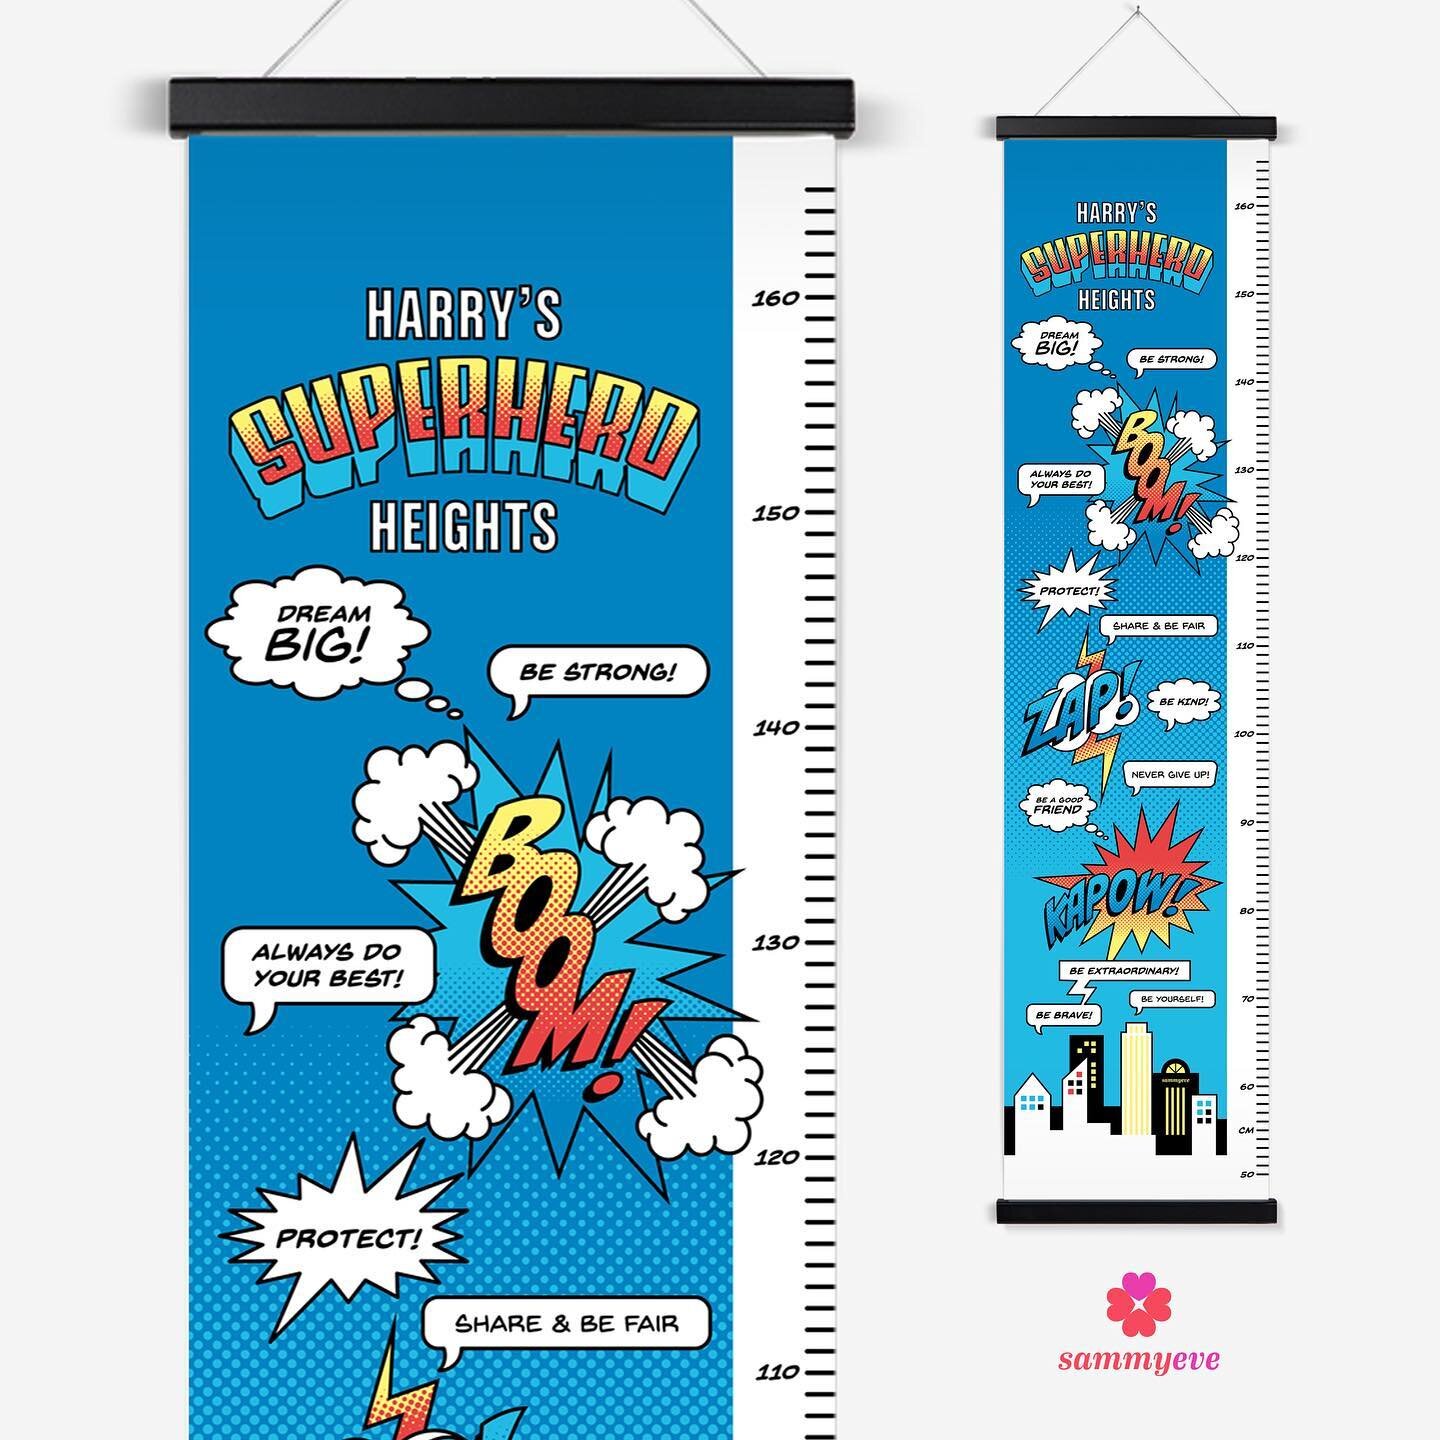 The Superhero Personalised Height Chart! Inspired by retro comic books and uses authentic fonts and traditional comic strip styles. Includes important codes of behaviour to inspire the little ones like &ldquo;Always do your best&rdquo;, &ldquo;Share 